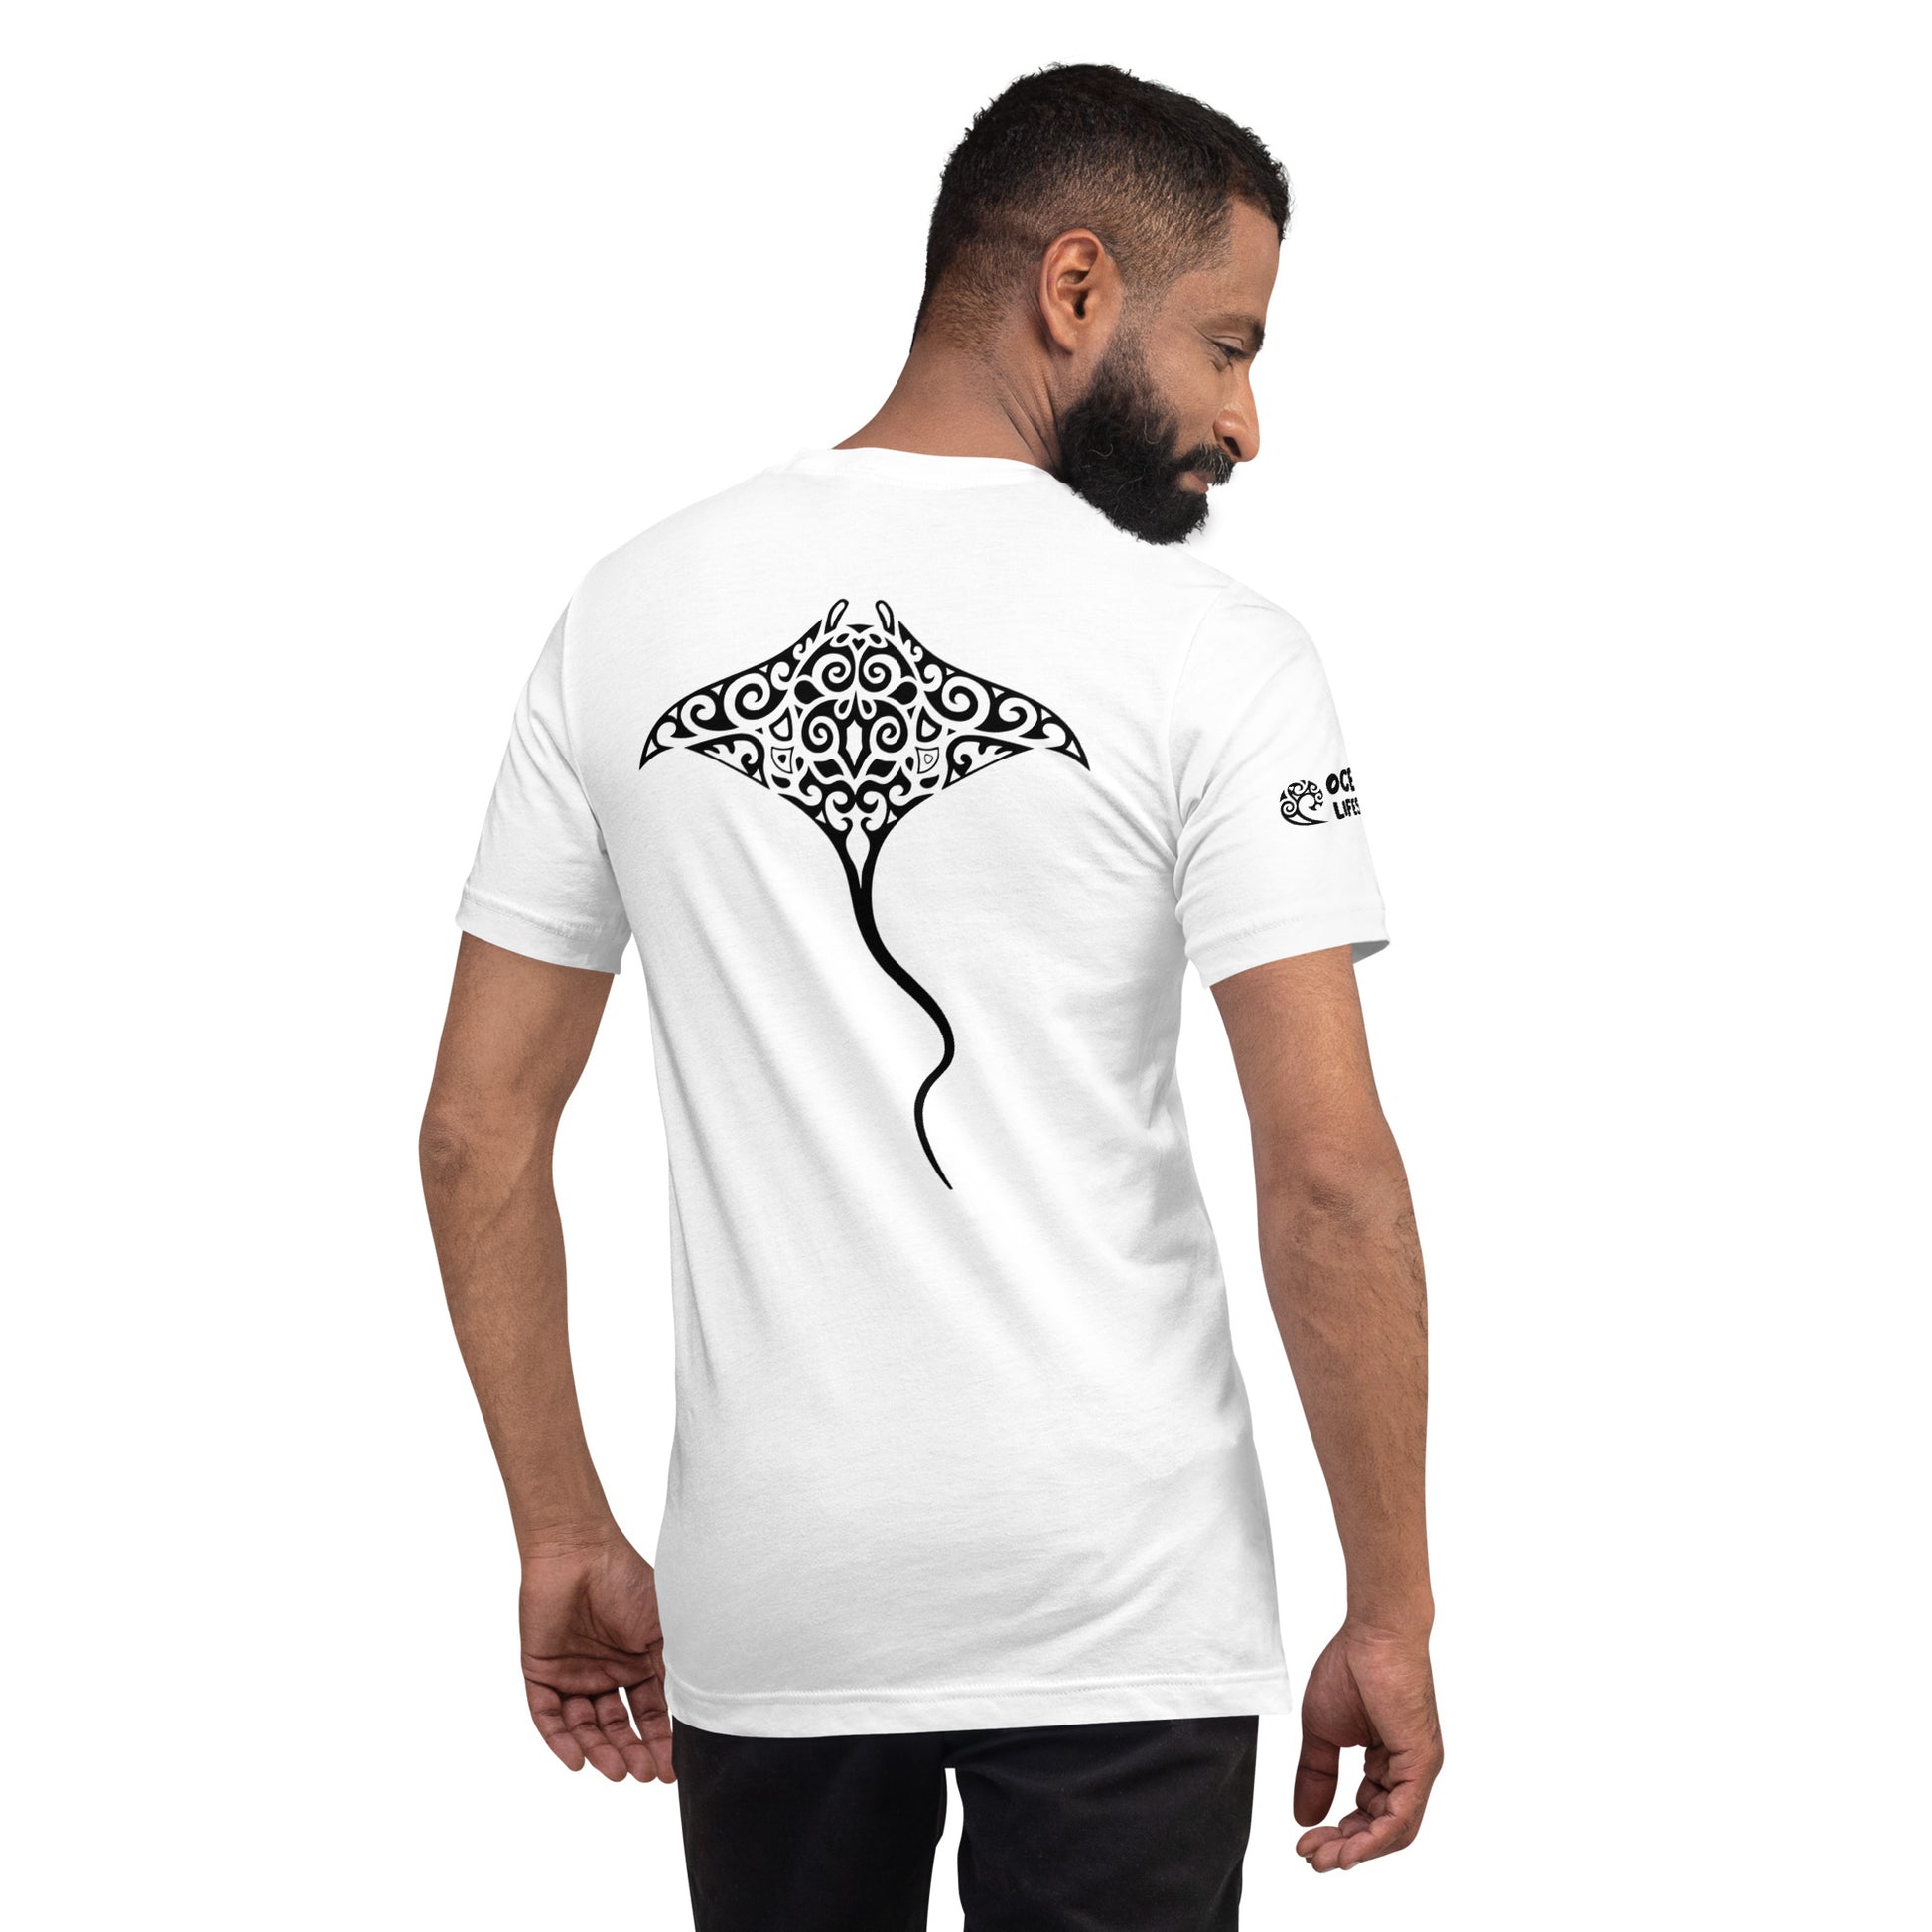 Oceana Lifestyle Apparels Polynesian Manta Ray T-Shirt - Full Back/ Front Crest - for Men and Women Orange Coral / Black Sand / M